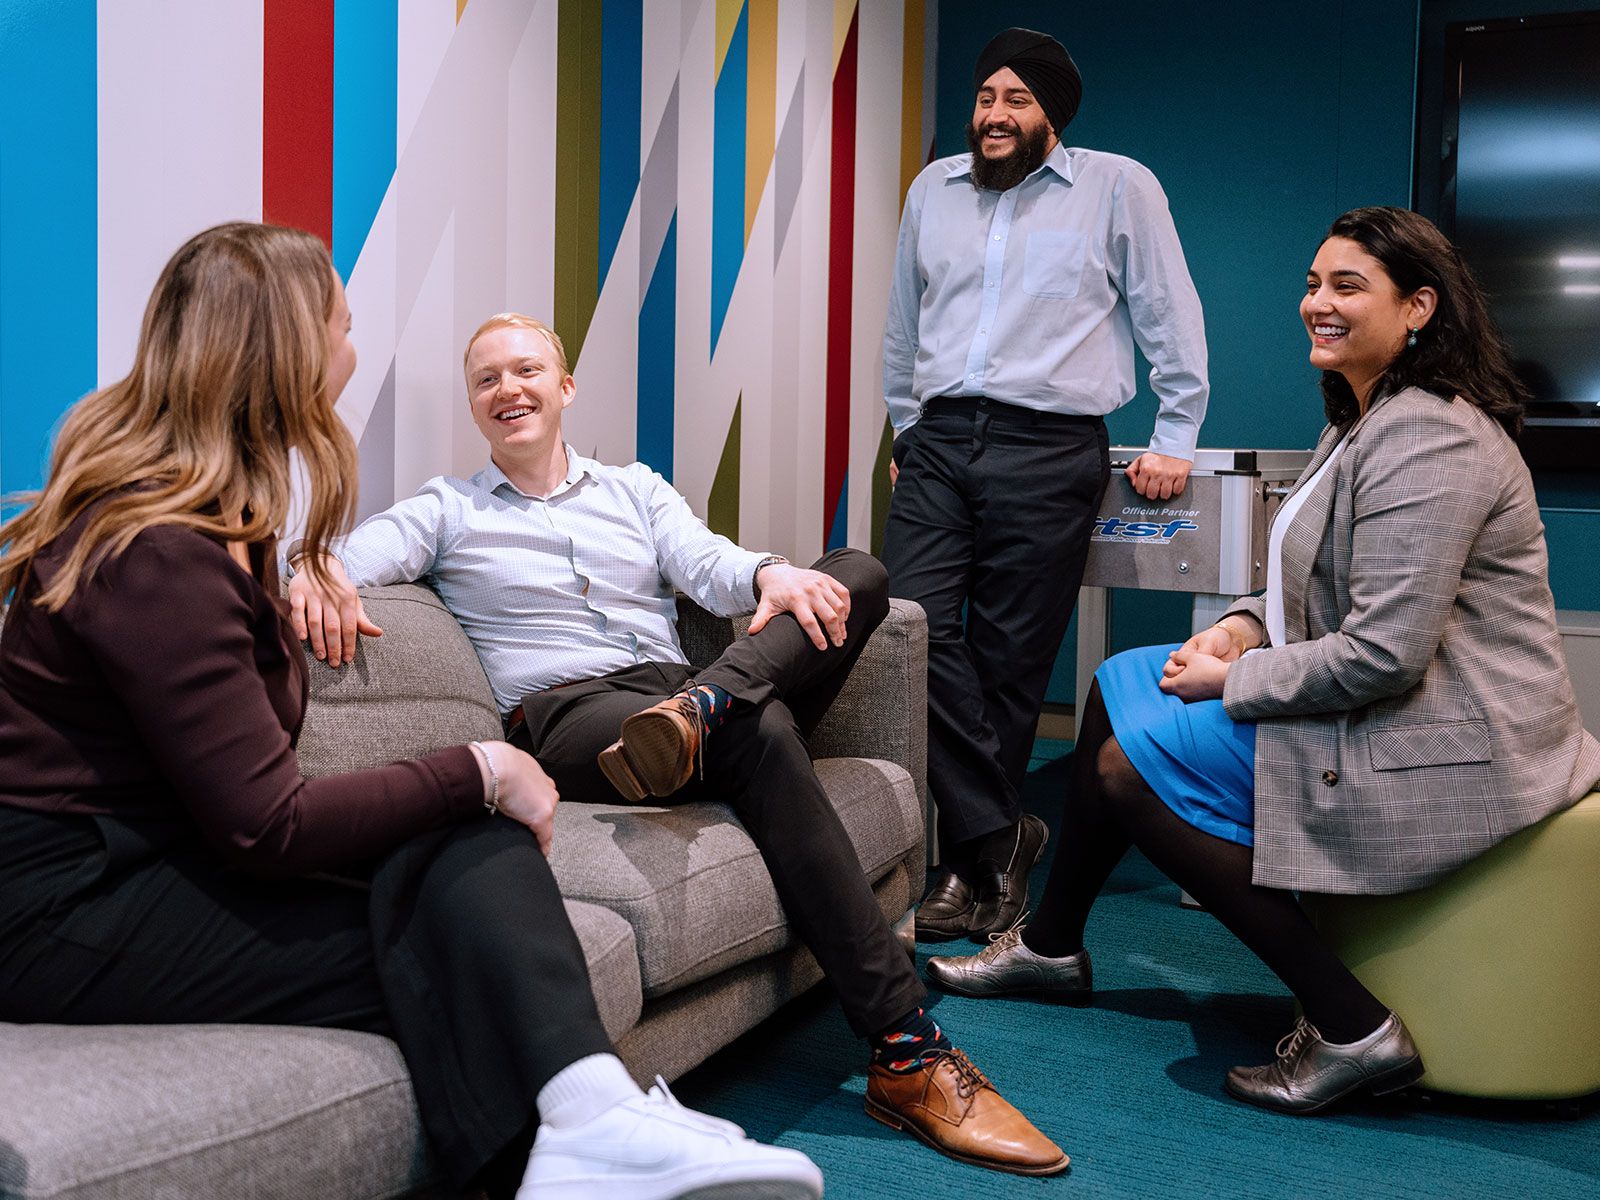 Four professionals are having a casual and cheerful conversation in a modern office lounge with colorful wall designs, with two seated on a sofa and one on an ottoman while the fourth stands, suggesting a relaxed and collaborative work environment.